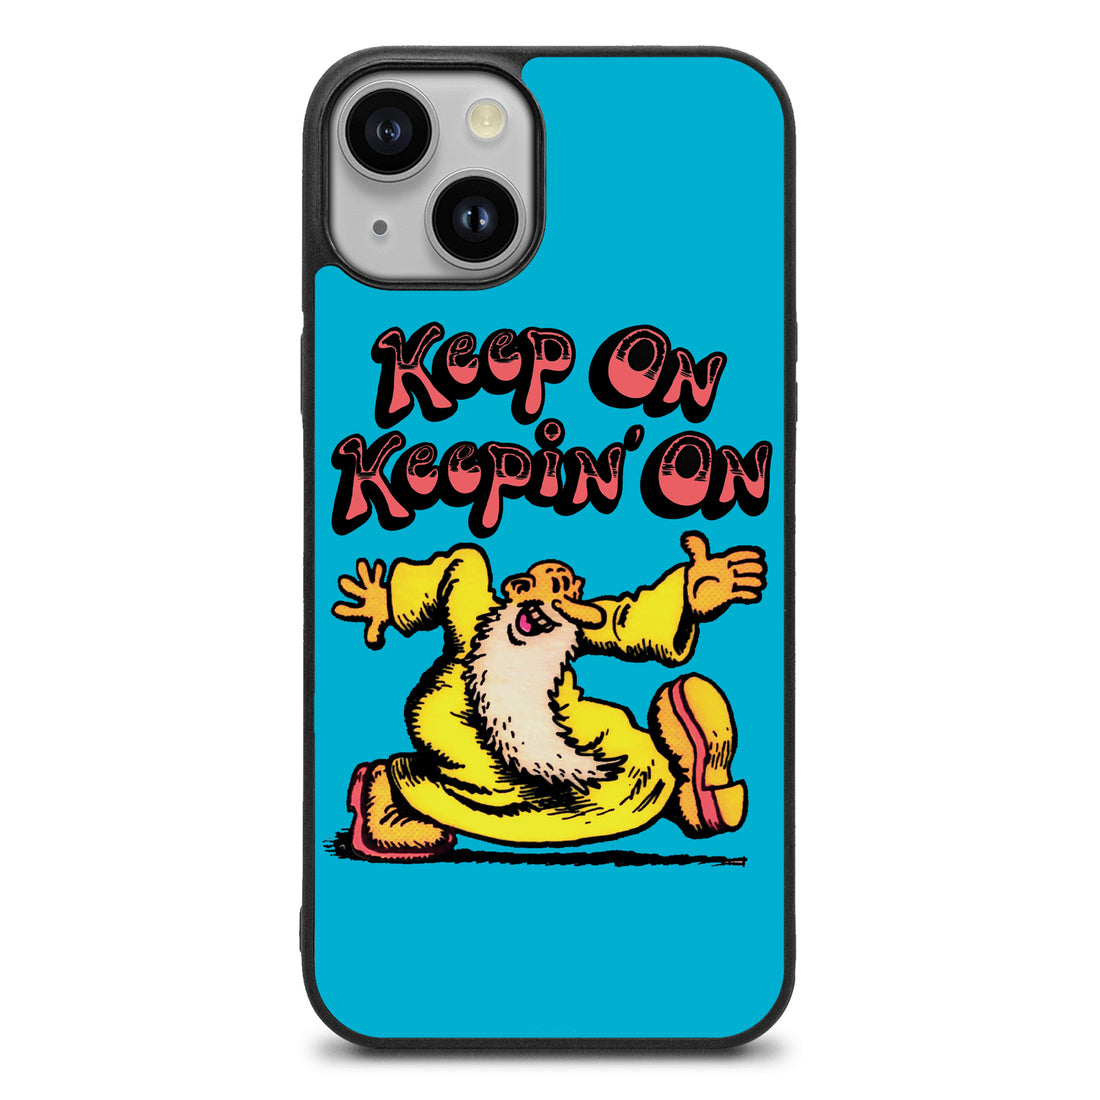 Keep On iPhone Case